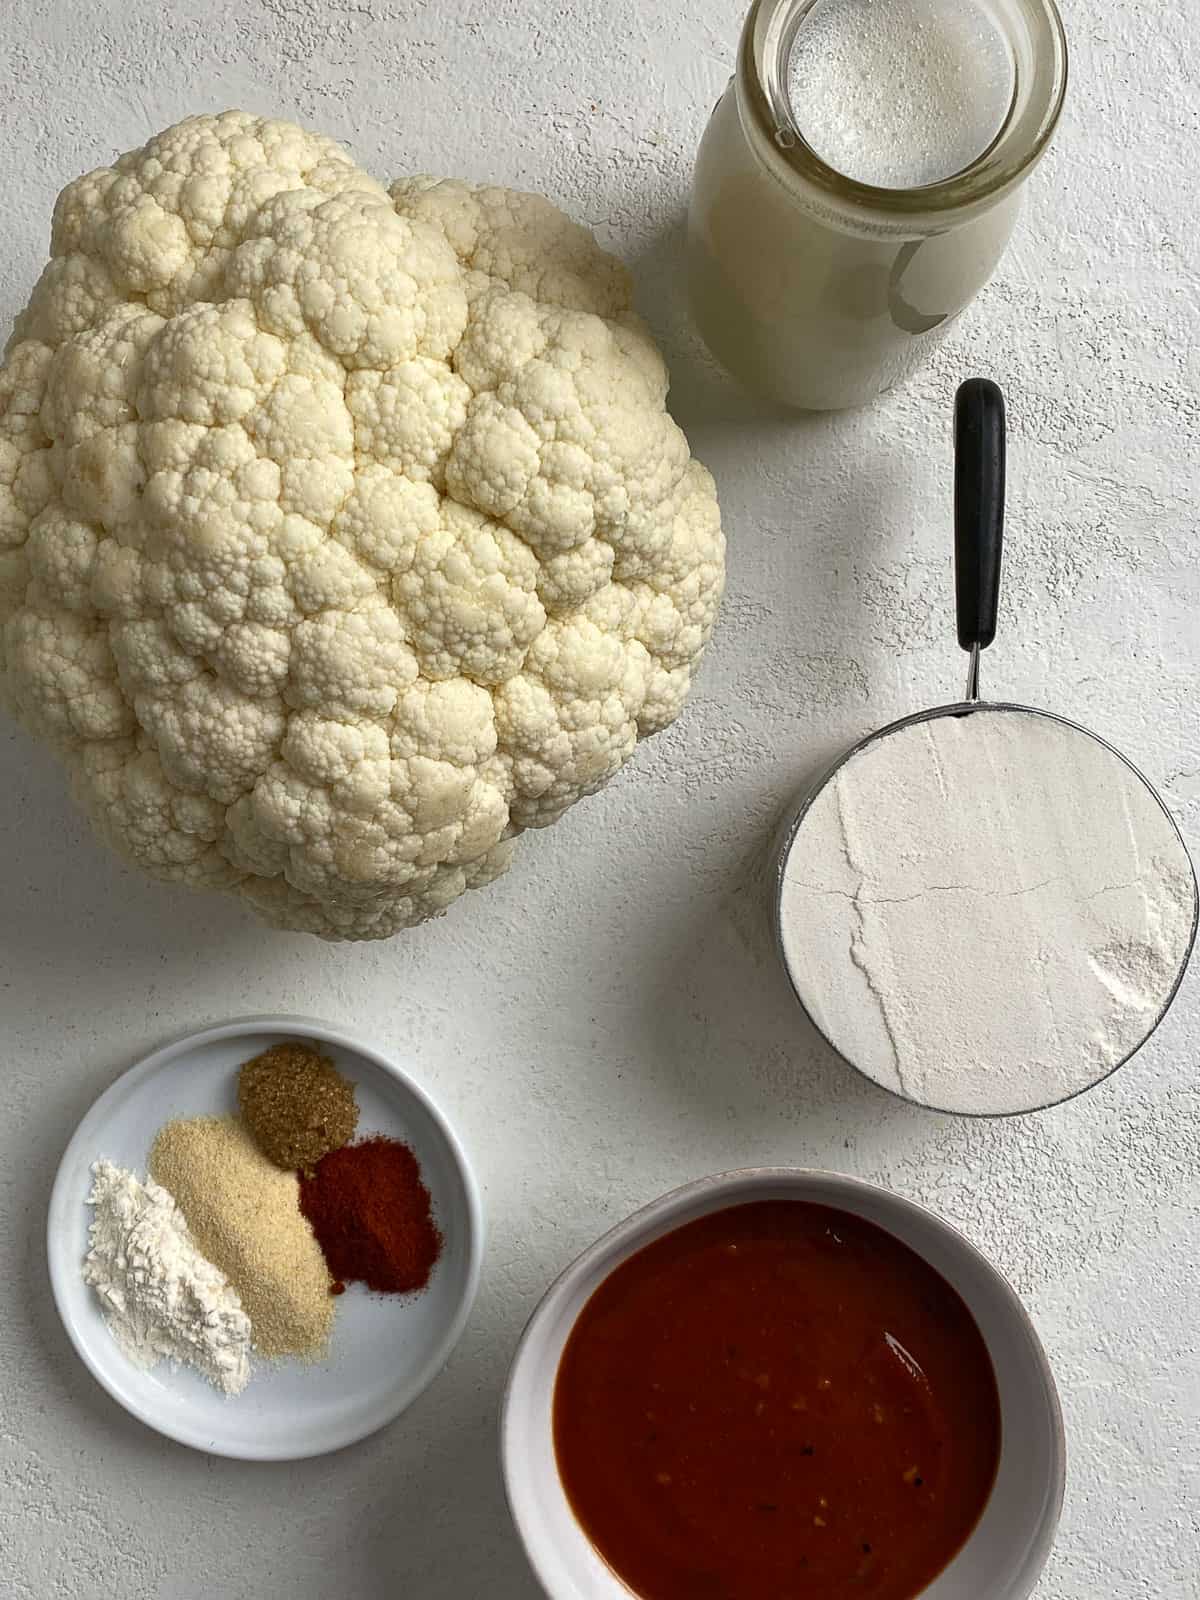 ingredients for BBQ Cauliflower Wings measured out against a light background